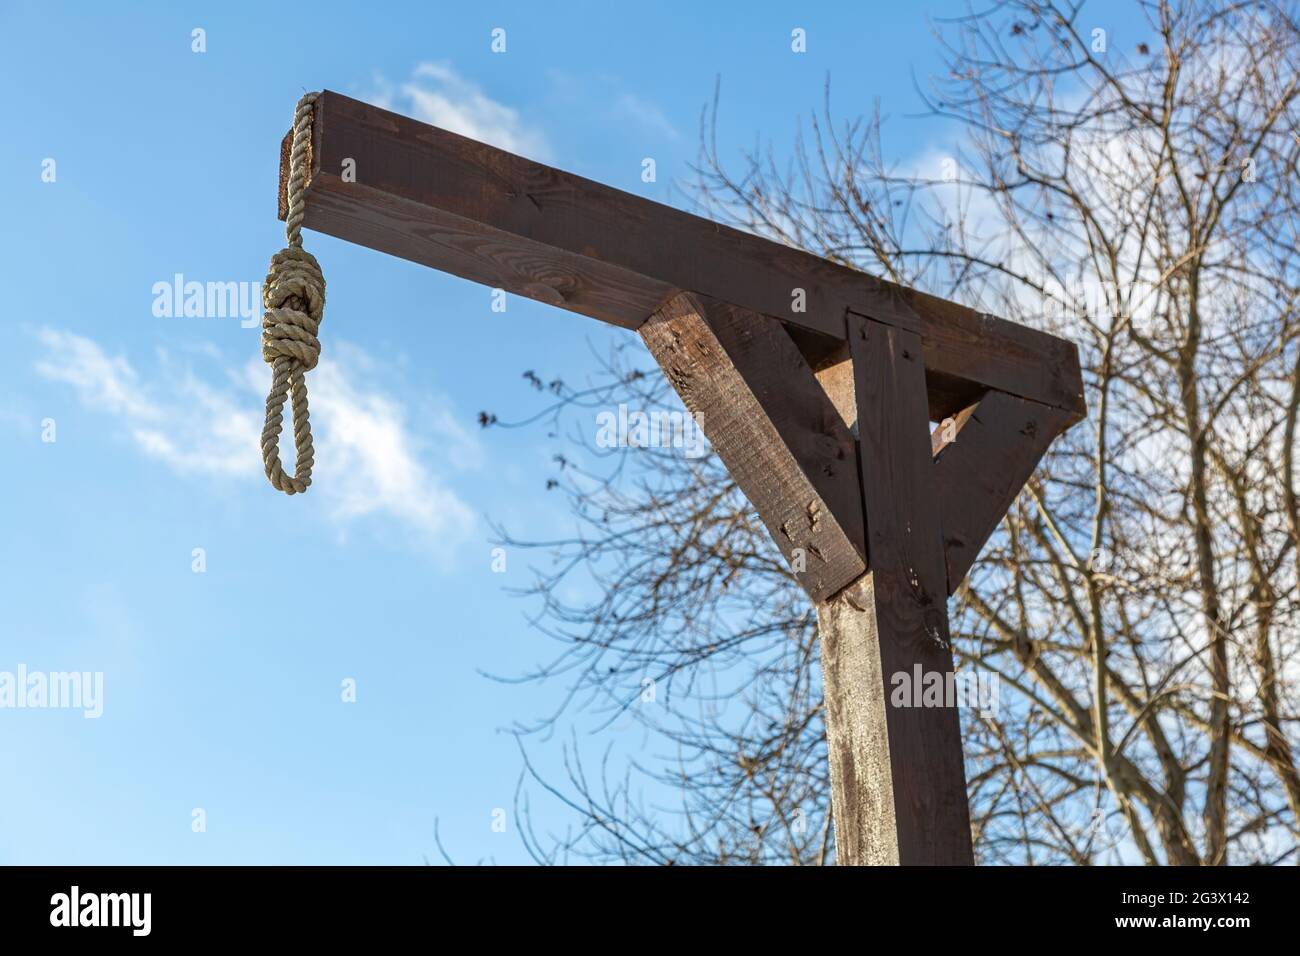 Wooden gallows on the background of branches and sky Stock Photo